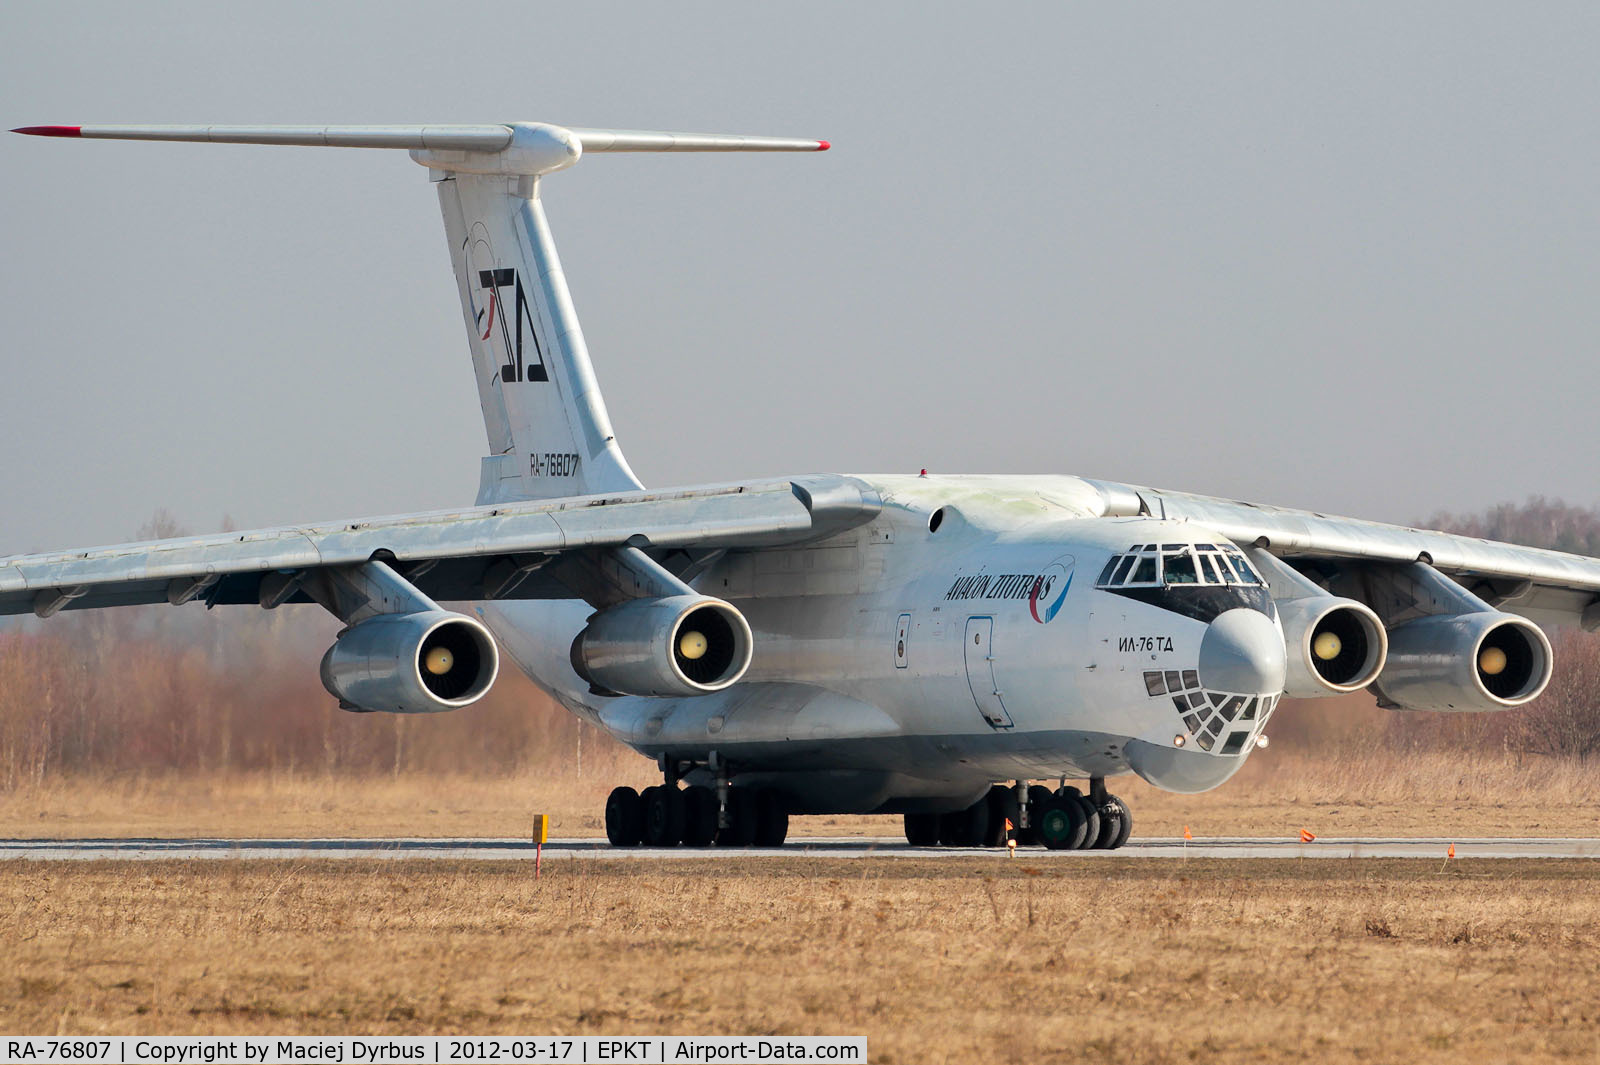 RA-76807, 1991 Ilyushin IL-76TD C/N 1013405176, On 17th March this Il-76 made a charter flight to Katowice Pyrzowice to take some military vehicles.